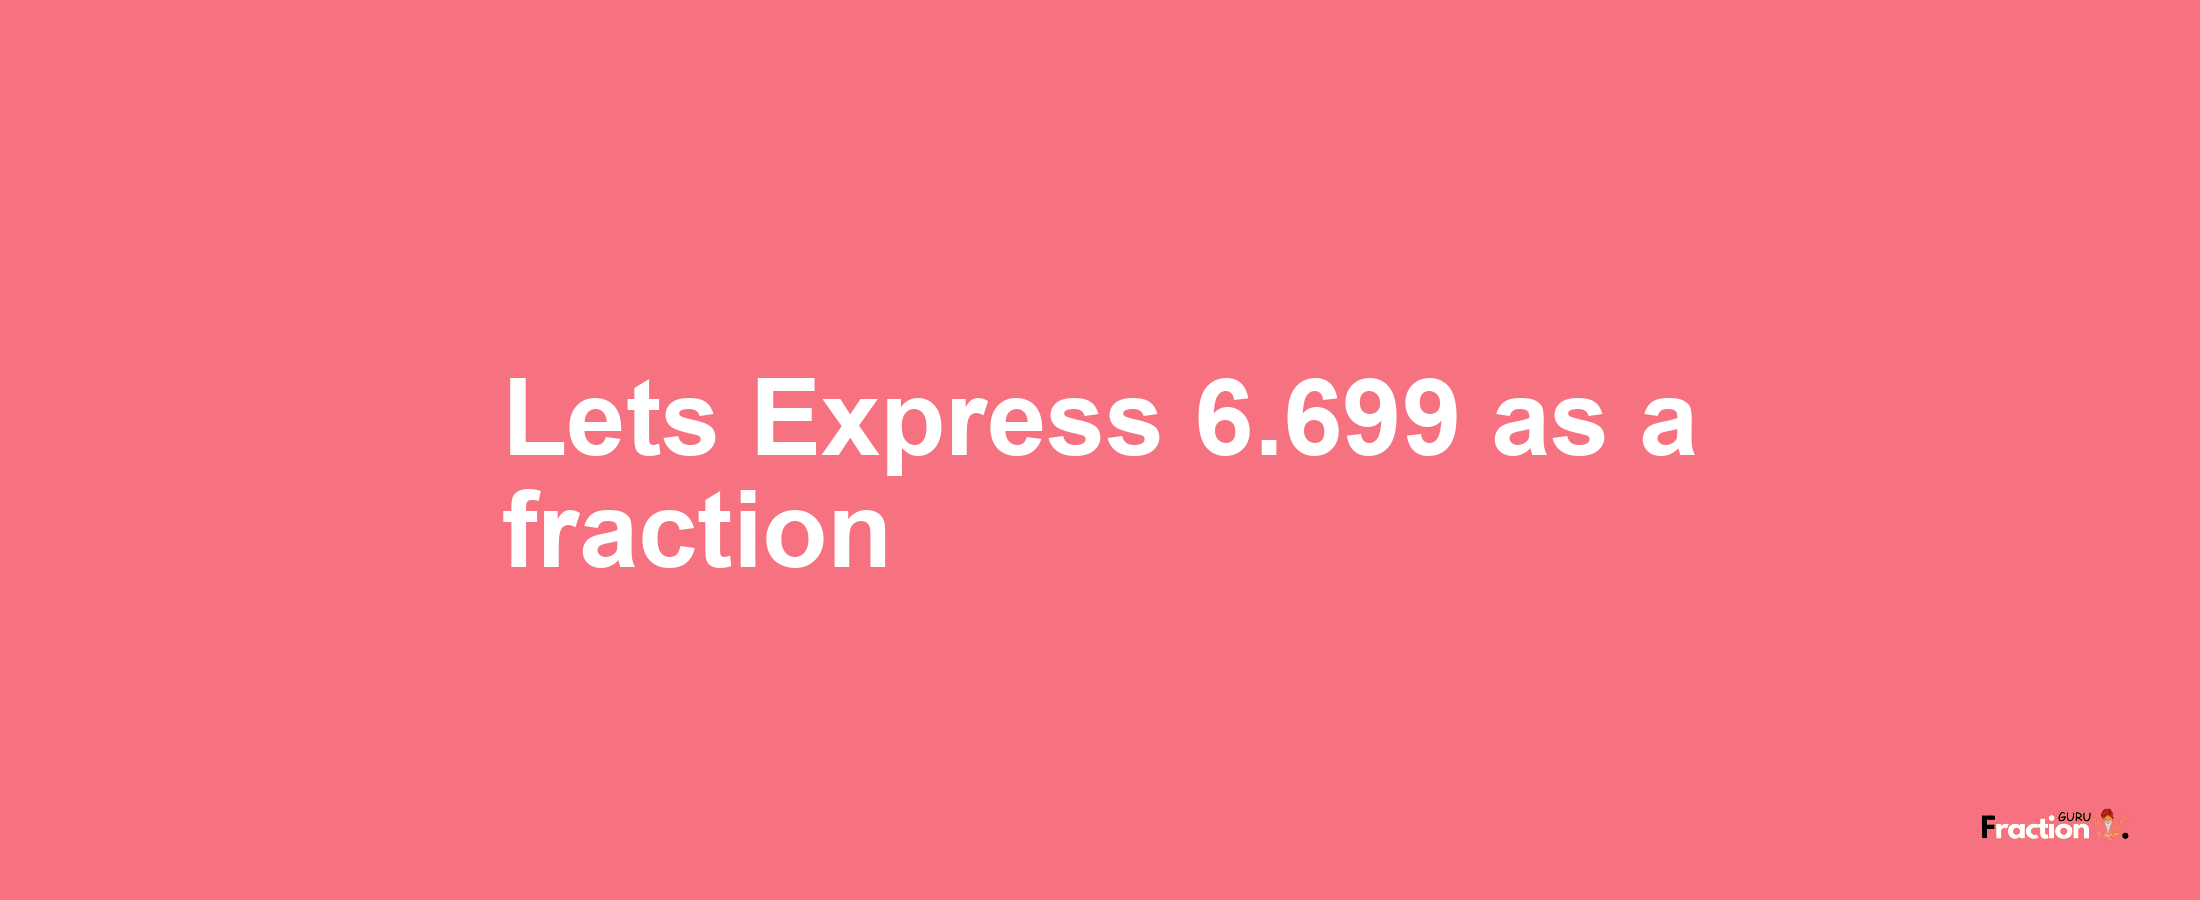 Lets Express 6.699 as afraction